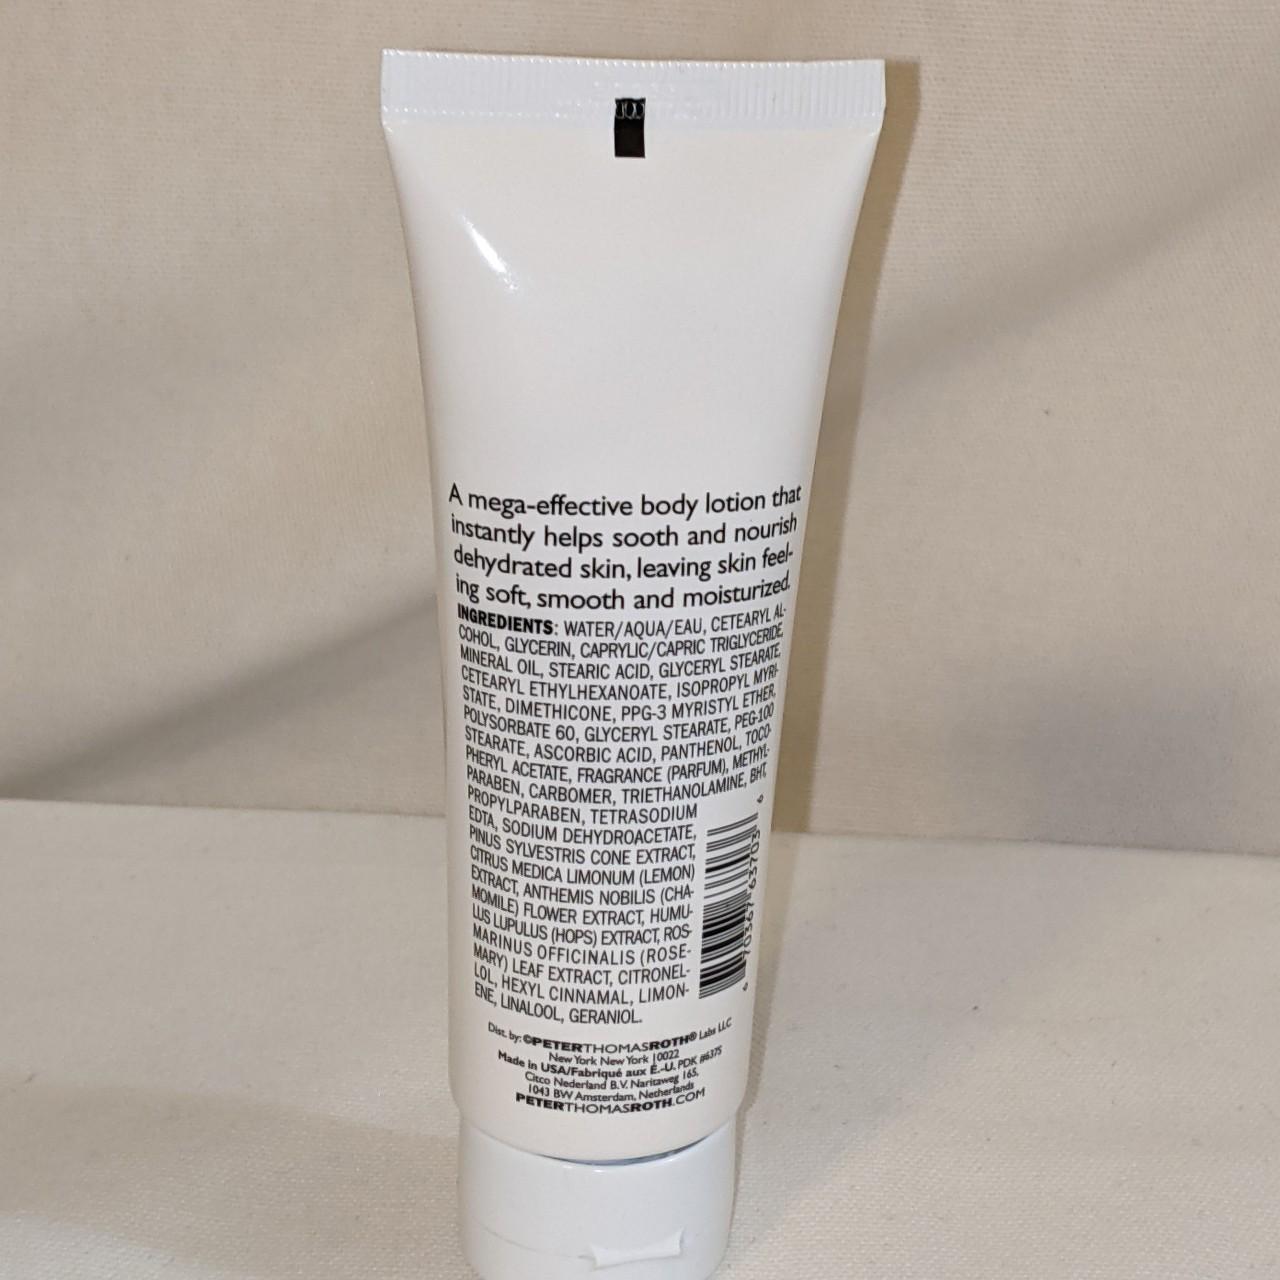 Product Image 2 - Peter Thomas Roth Body Lotion

Sealed